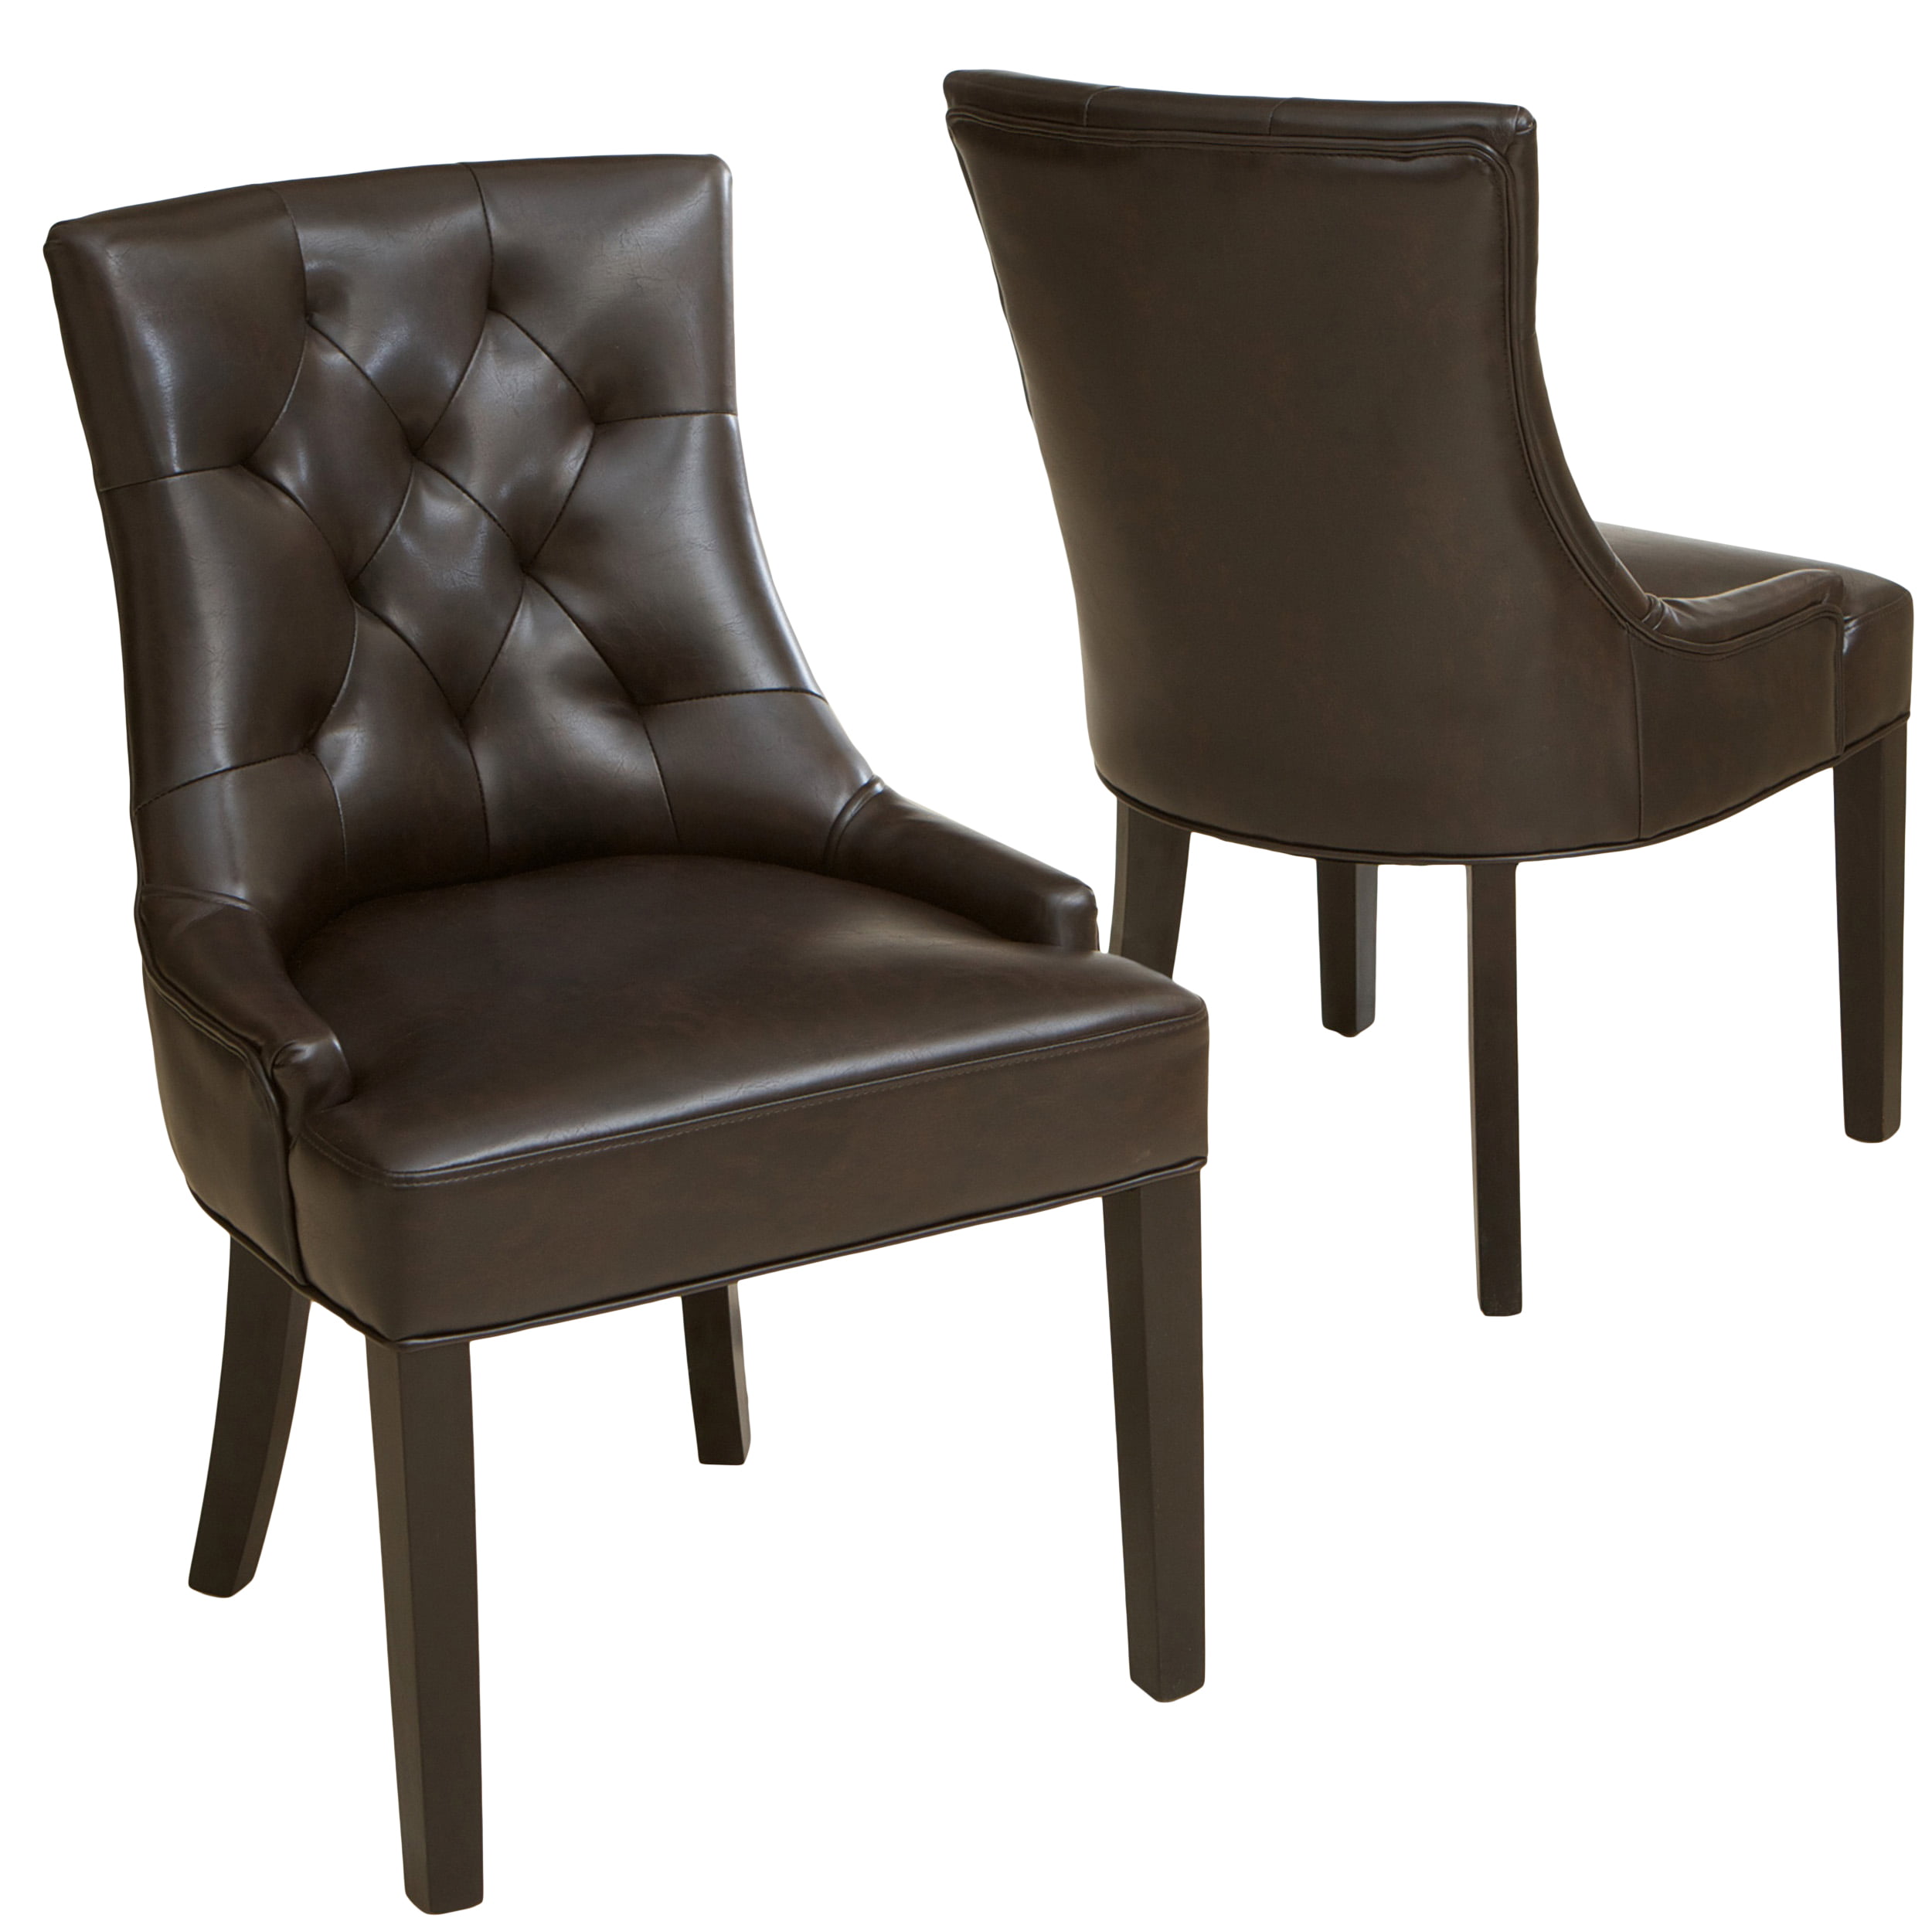 Gdf Studio Erica Contemporary Brown, Bonded Leather Dining Chairs